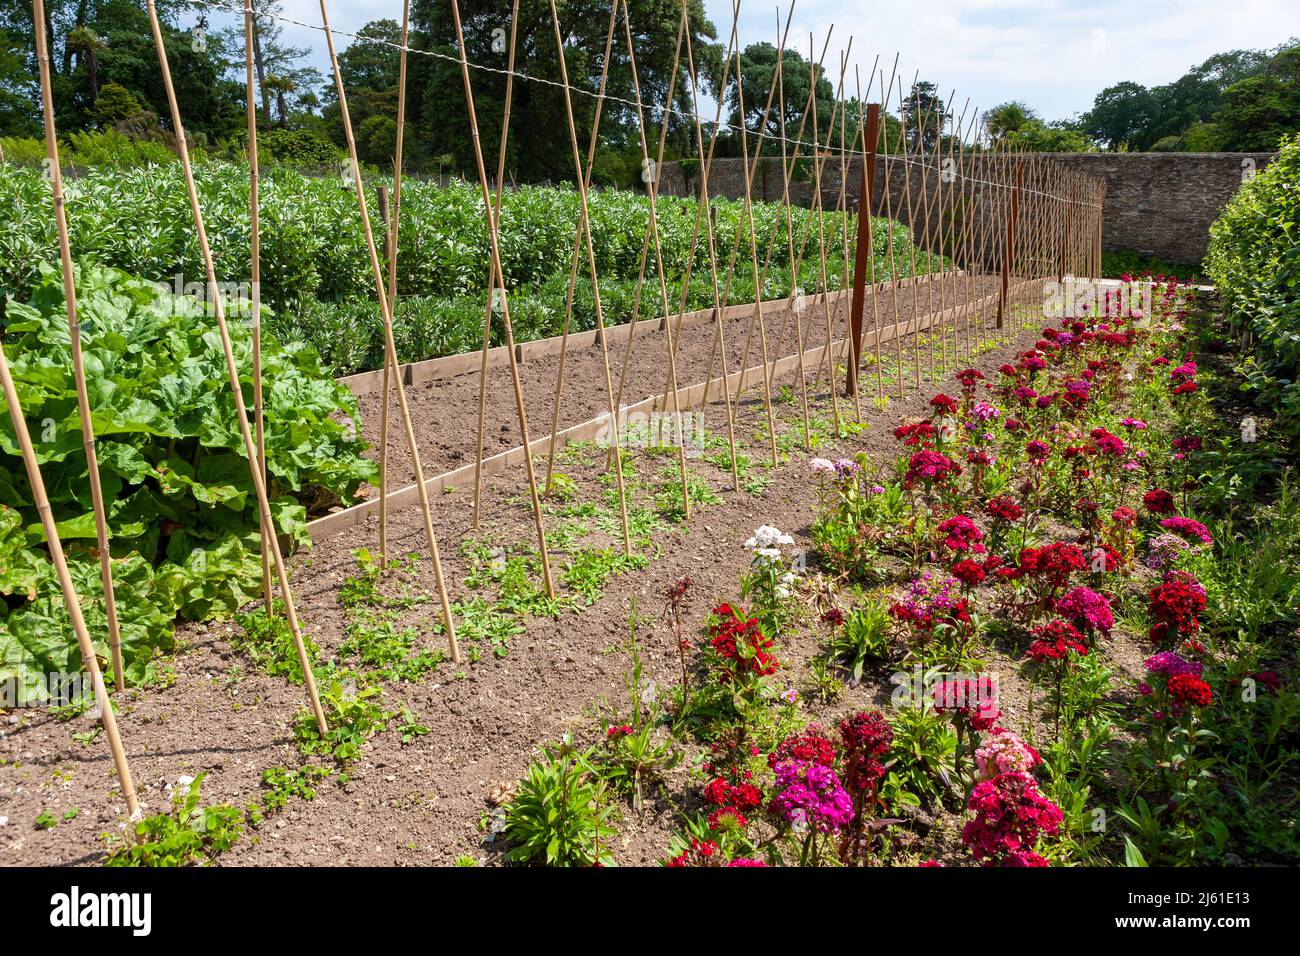 Vegetables and flowers in the extensive Vegetable Garden in the Lost Gardens of Heligan, Cornwall, UK Stock Photo